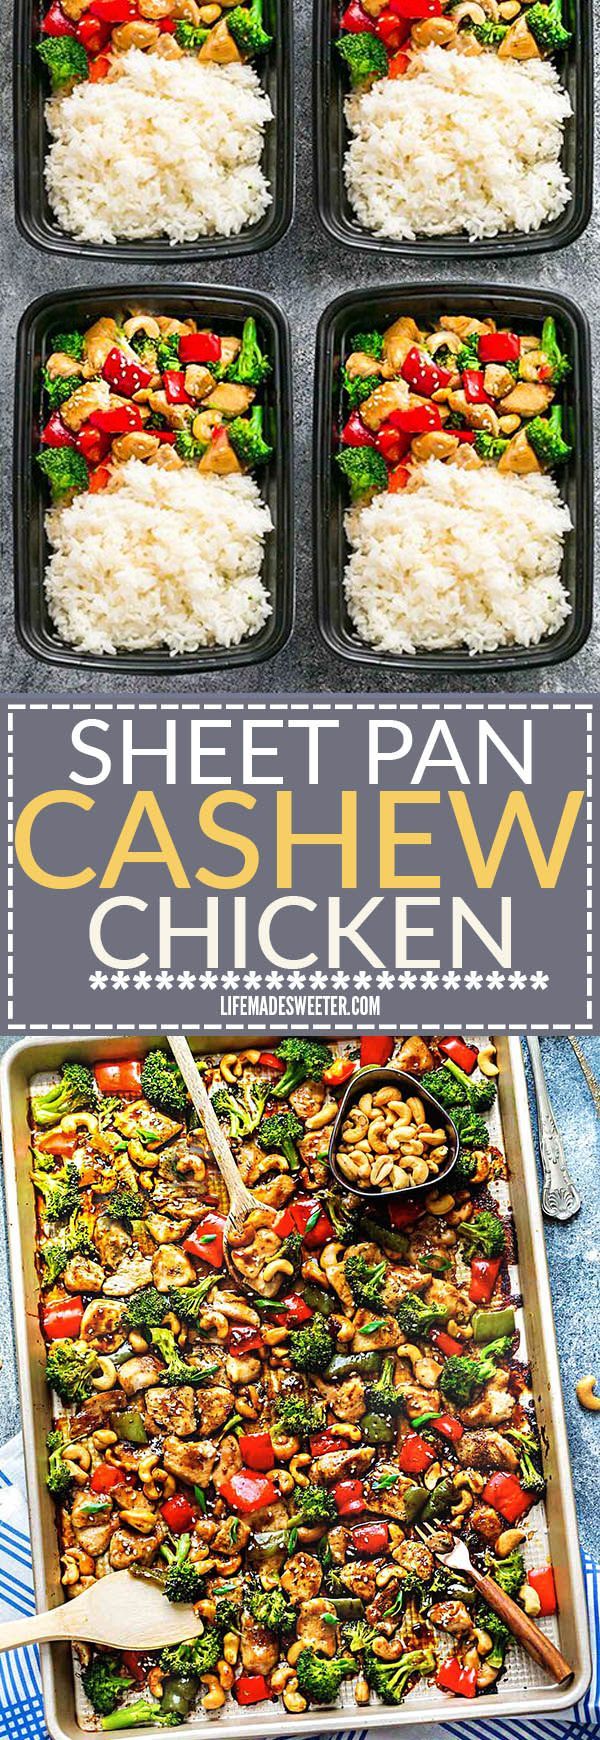 Cashew Chicken Sheet Pan has all the flavors of the popular Chinese restaurant takeout dish made on a sheet pan. Best of all,